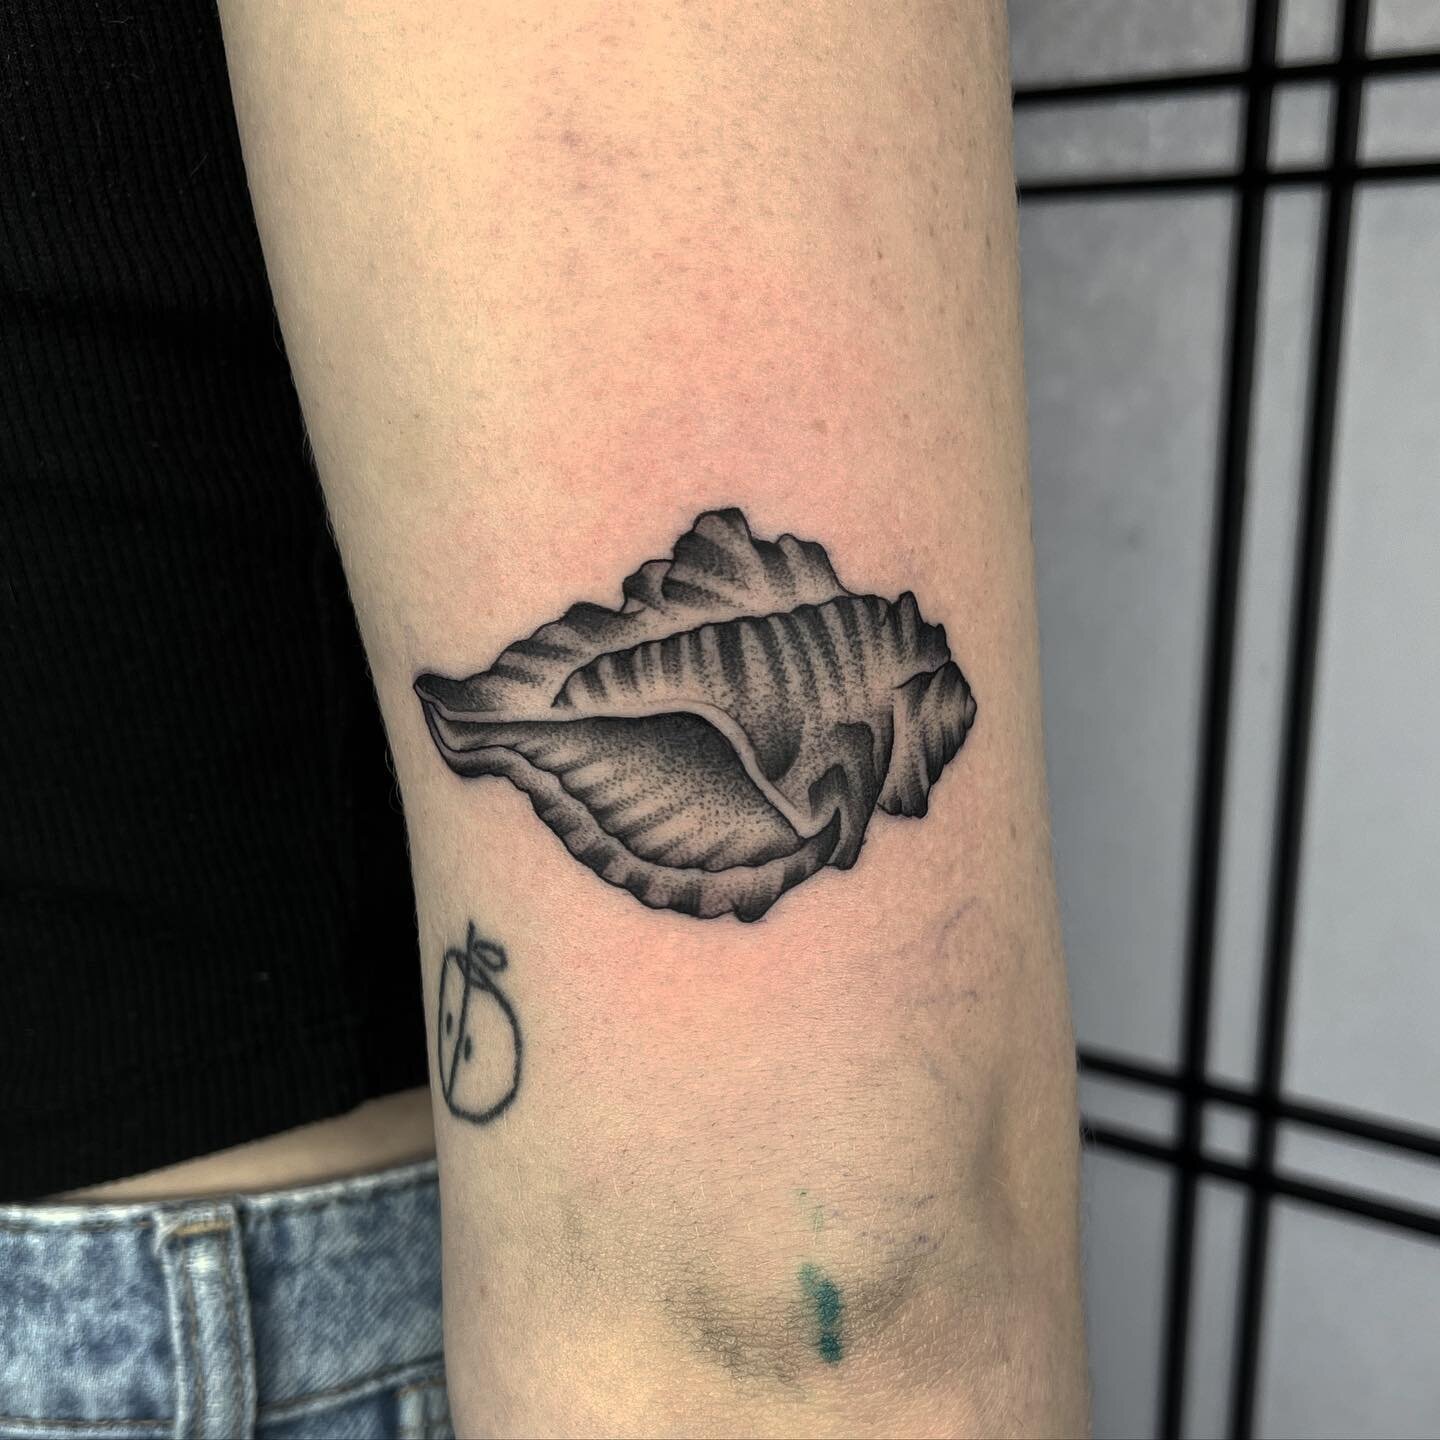 a little shell for lovely Georgia. Thank you! 
@houseofdaggerstattoo